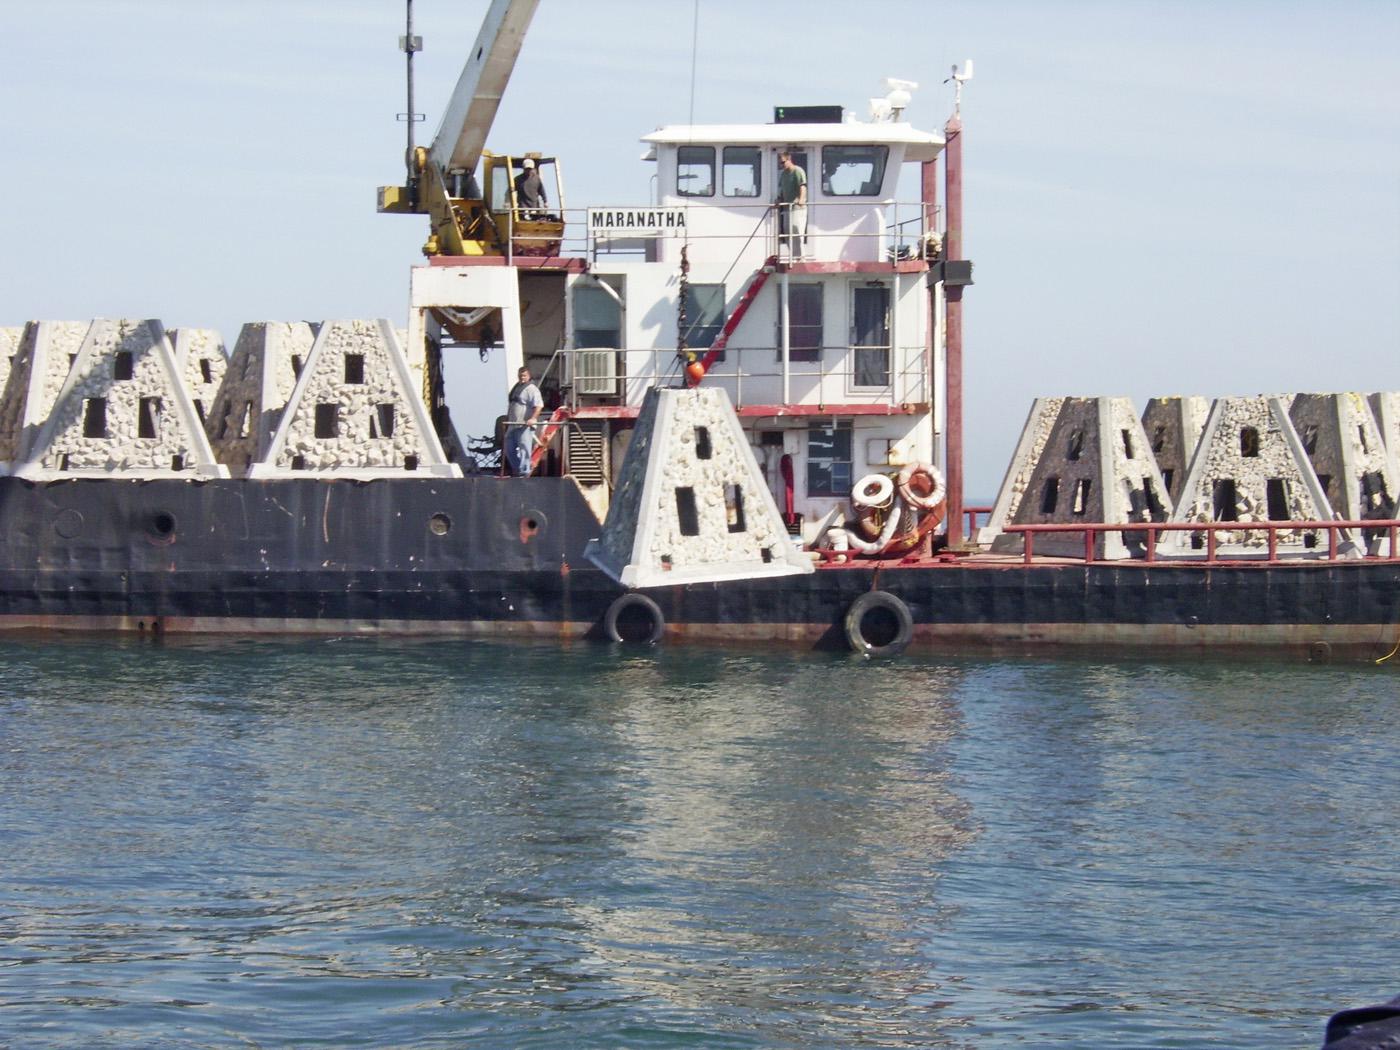 Artificial reefs provide a place of refuge for red snapper and Mississippi State University is researching the role that the reefs play in enhancing fisheries targeting red snapper. (Photo by Mississippi Department of Marine Resources)